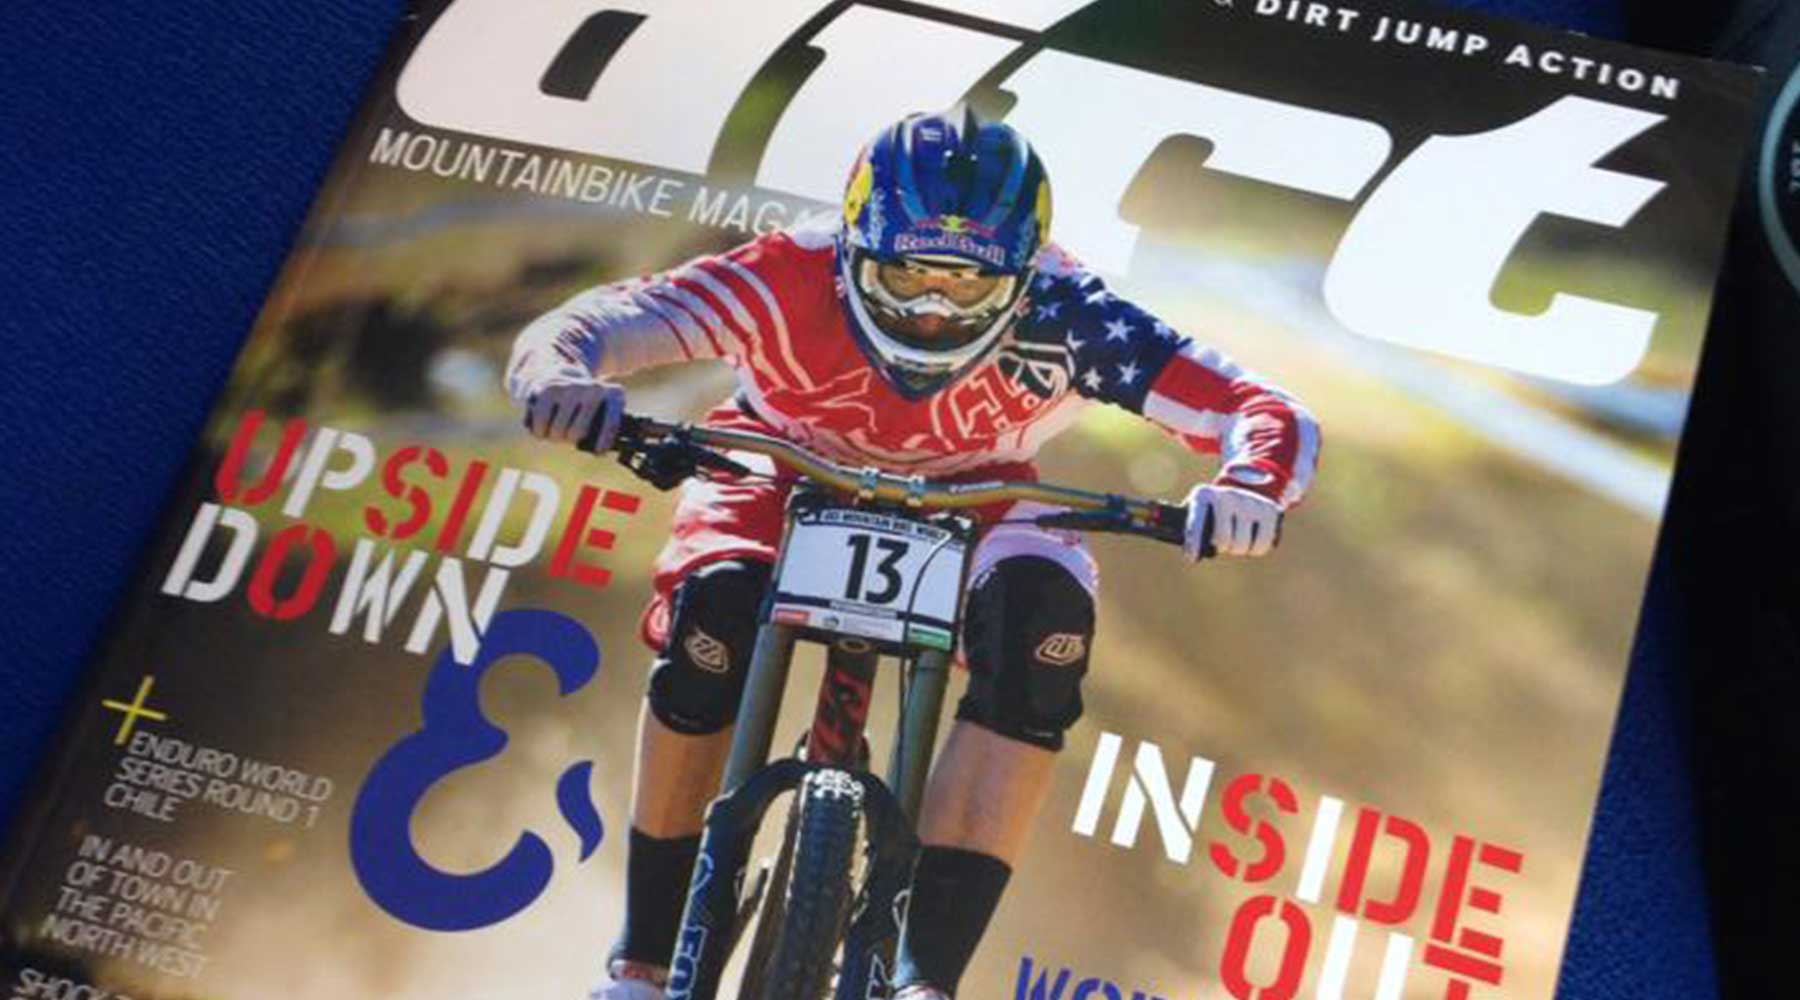 DIRT MAGAZINE from the Cairns World Cup Launch